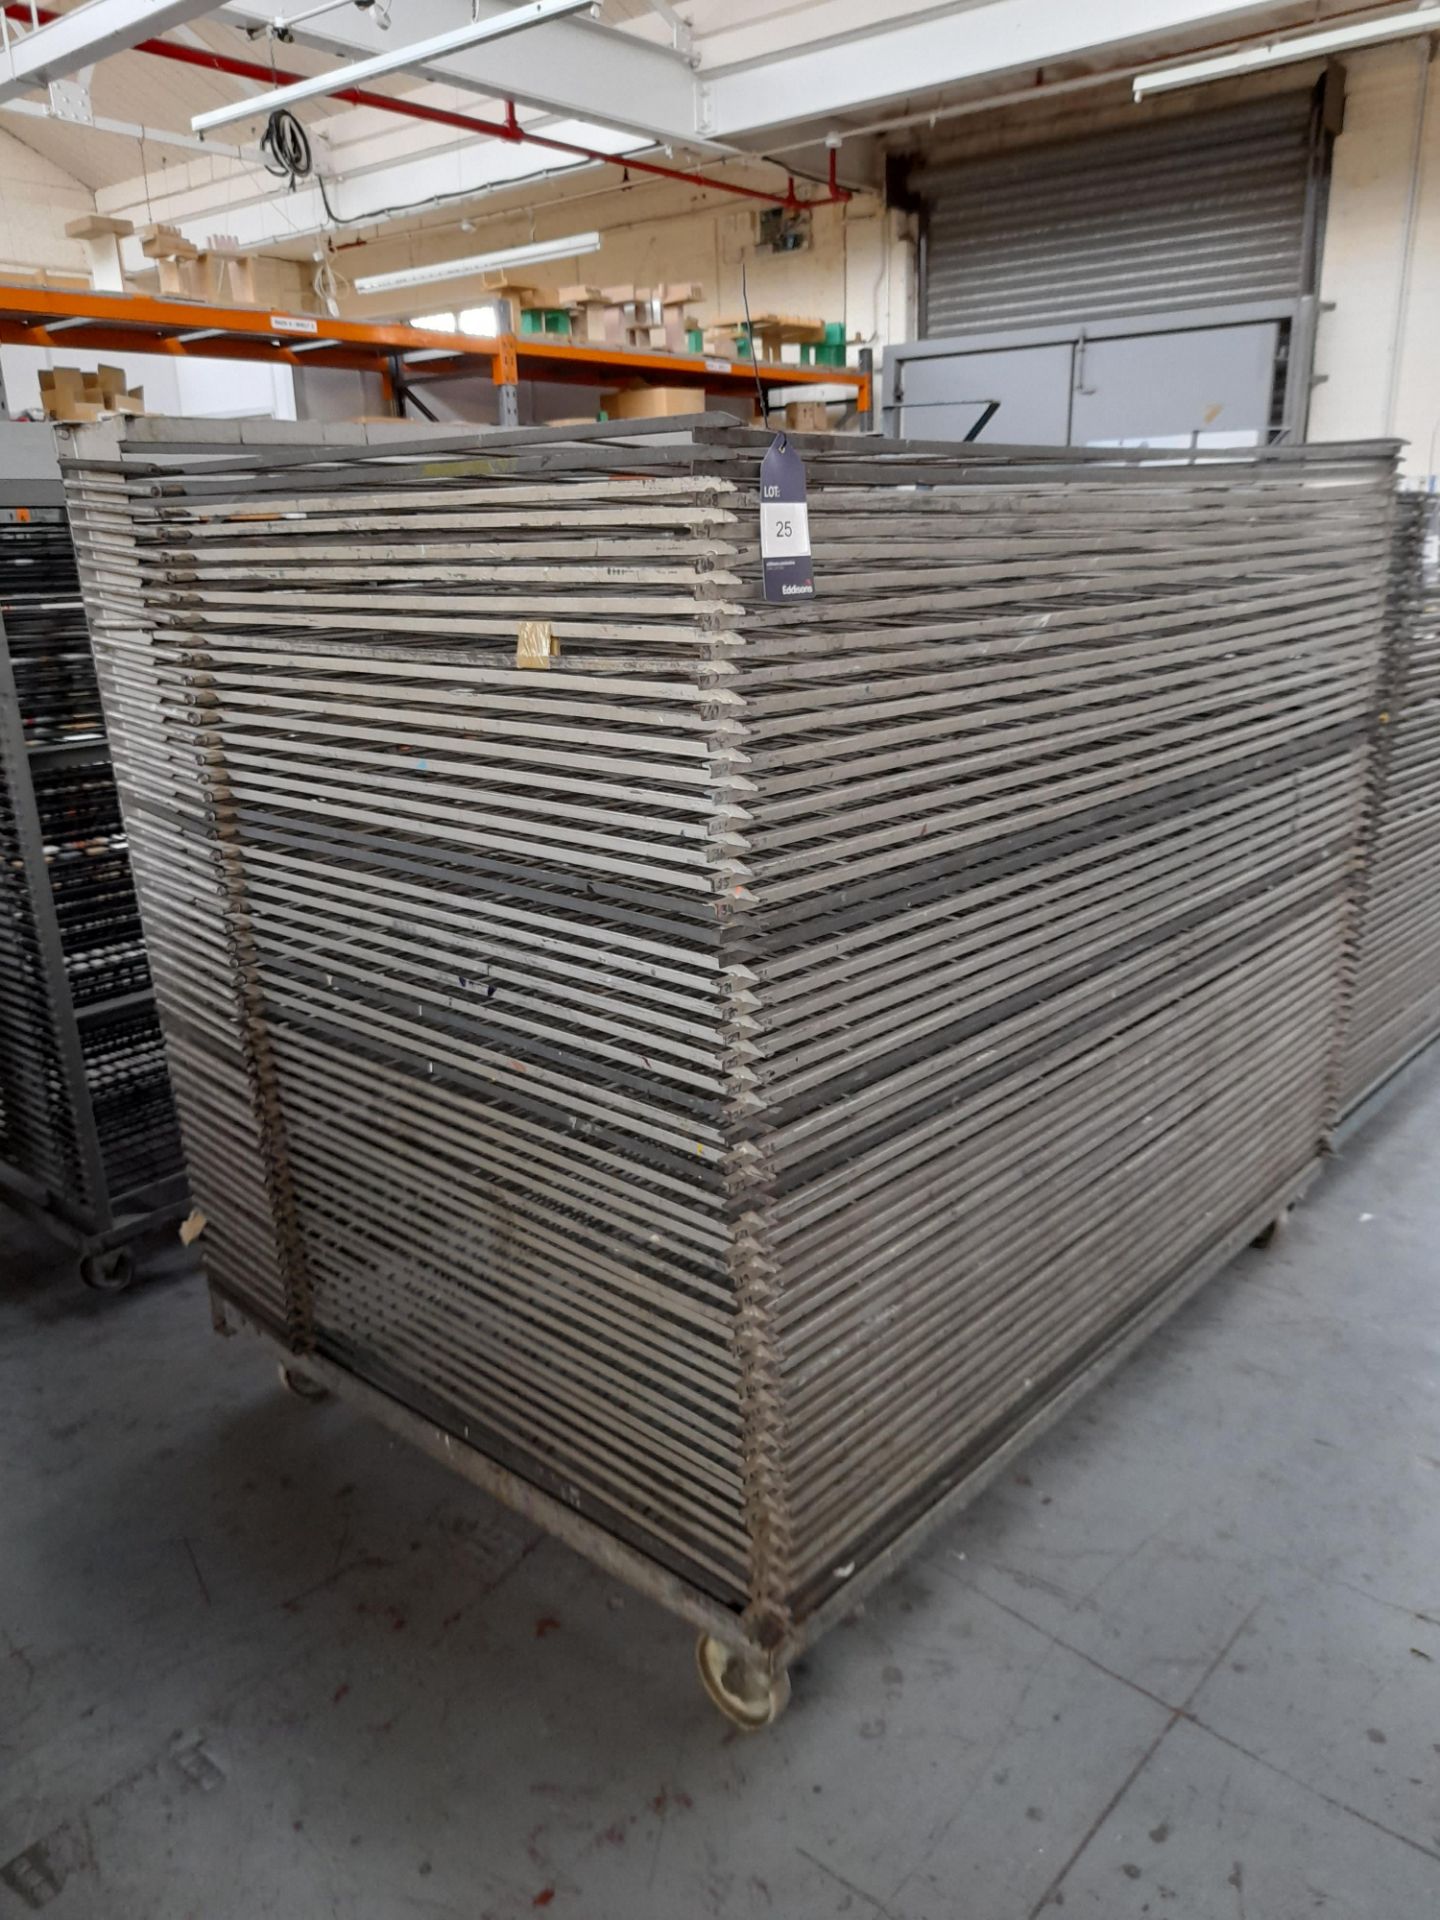 Mobile Drying Rack, circa 1600mm x 1050mm, 50 trays - Image 2 of 2